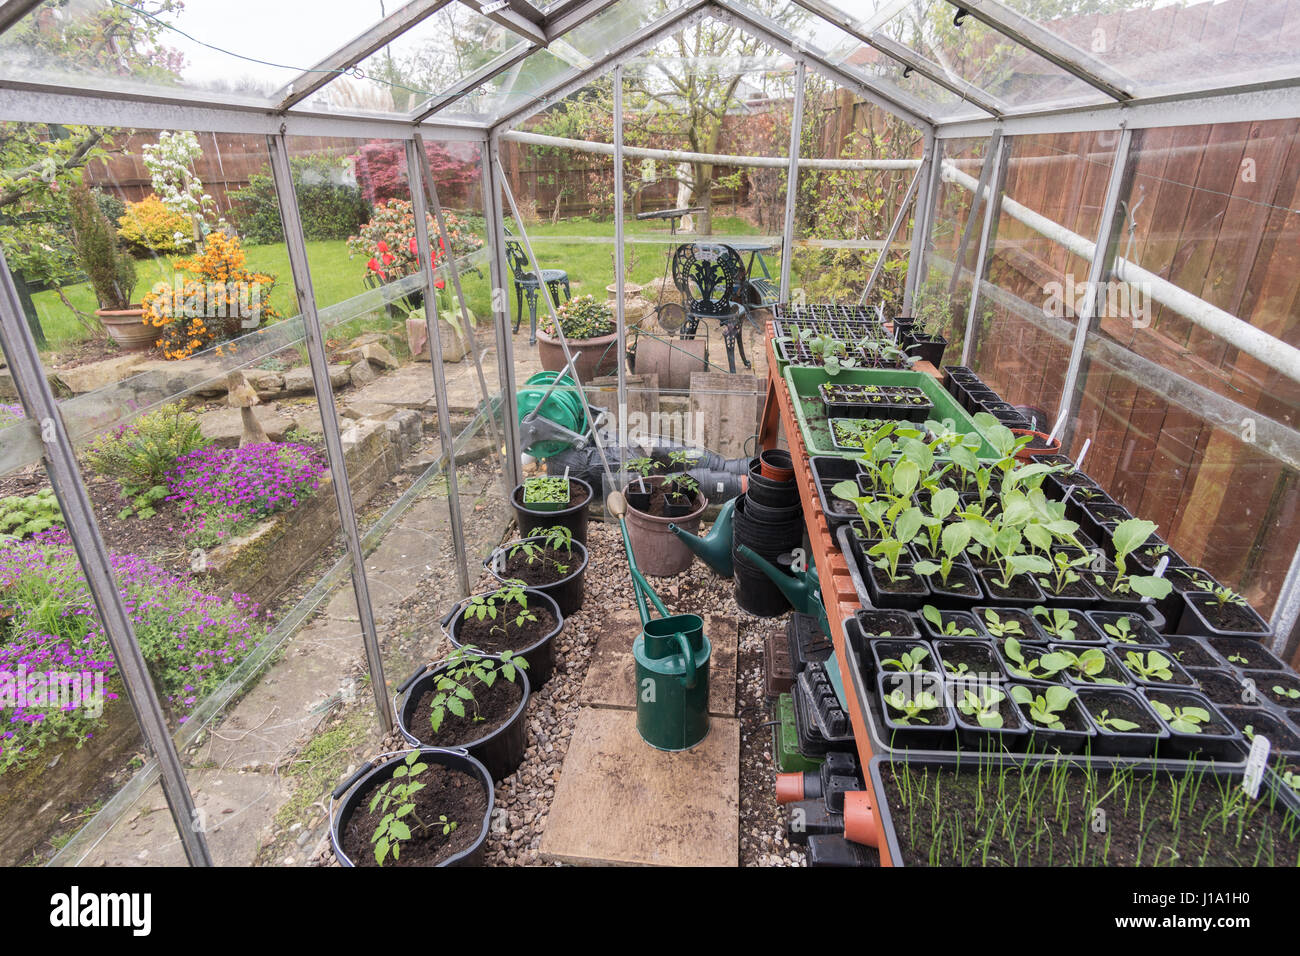 An amateur gardener's greenhouse full of young plants in the spring, England, UK Stock Photo